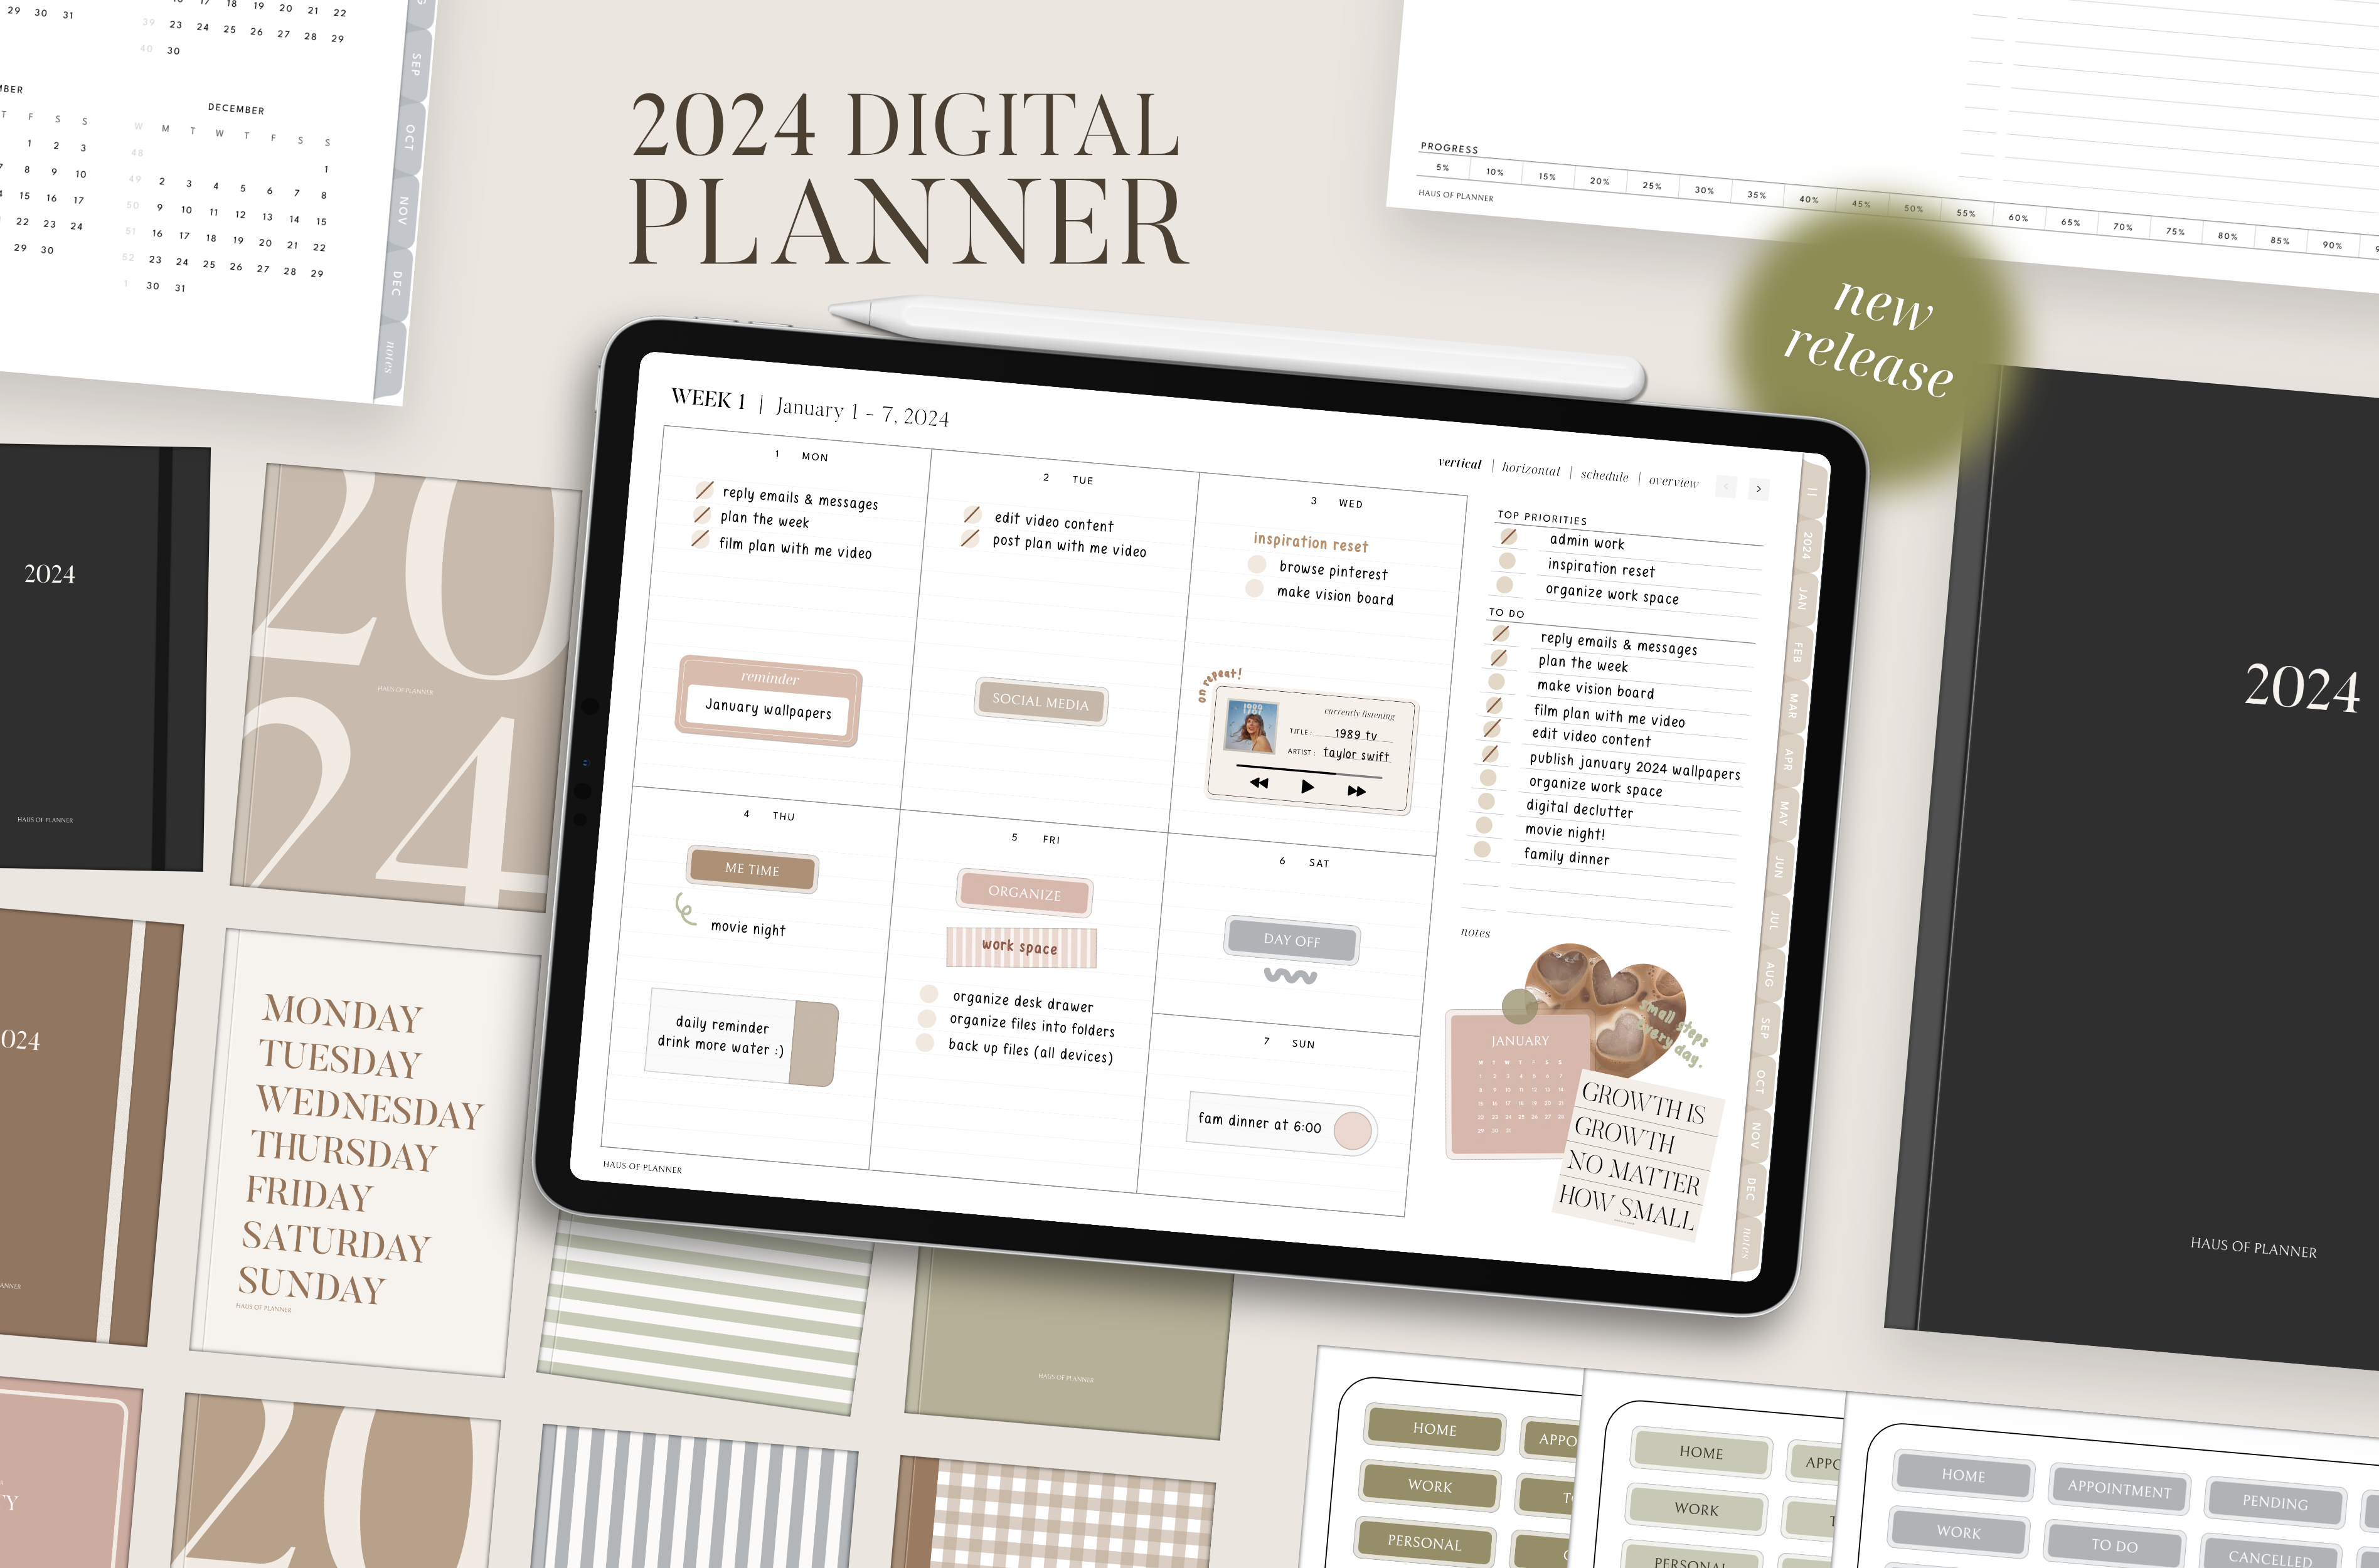 Everyday Digital Stickers 2.0 — 2024 Digital Planners by MADEtoPLAN